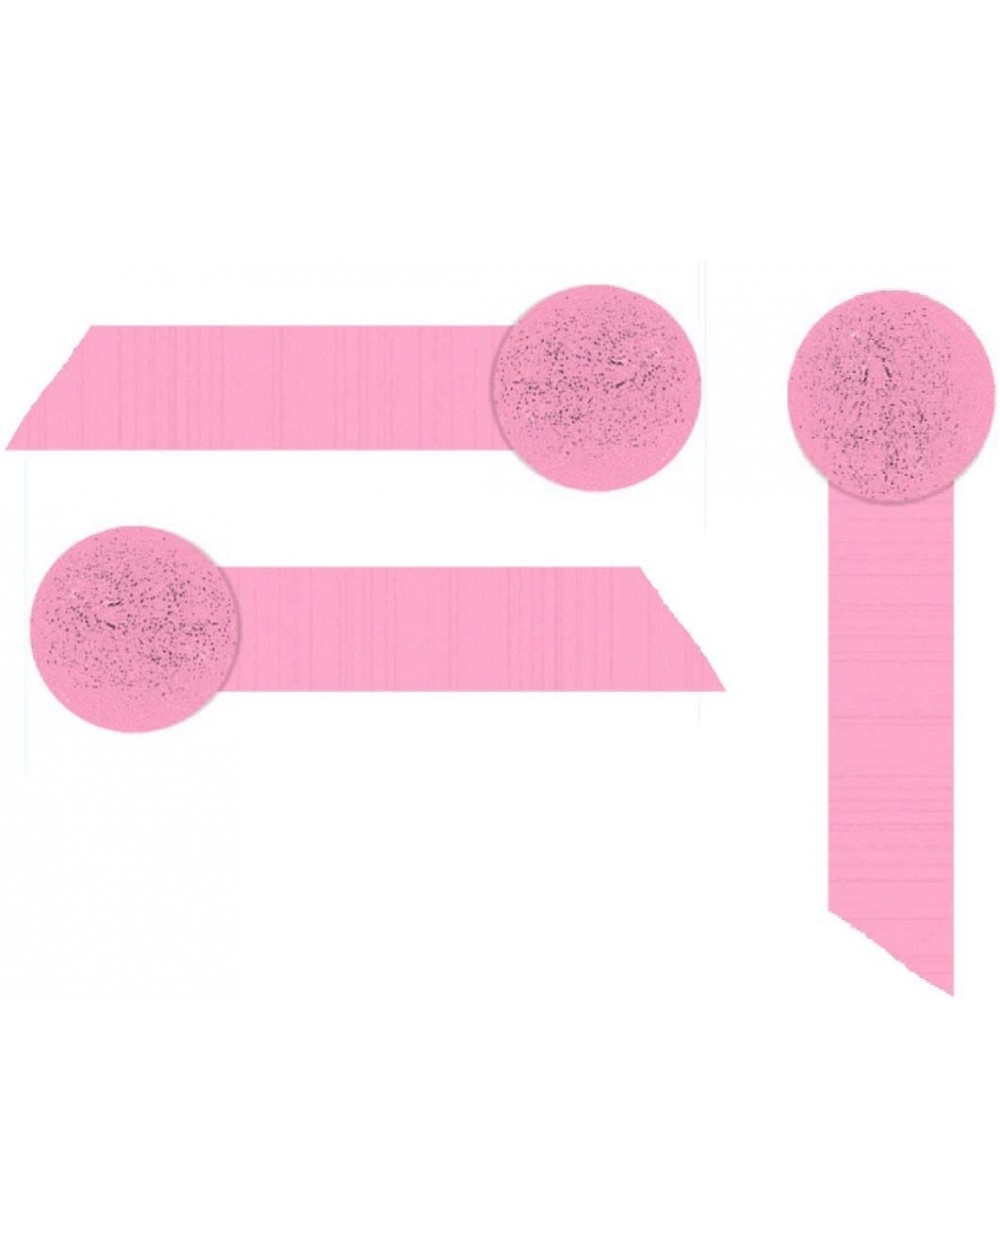 Streamers Crepe Paper Streamers for Birthday Party Wedding School Celebrations Decorations (Light Pink- 3 Rolls) - Light Pink...